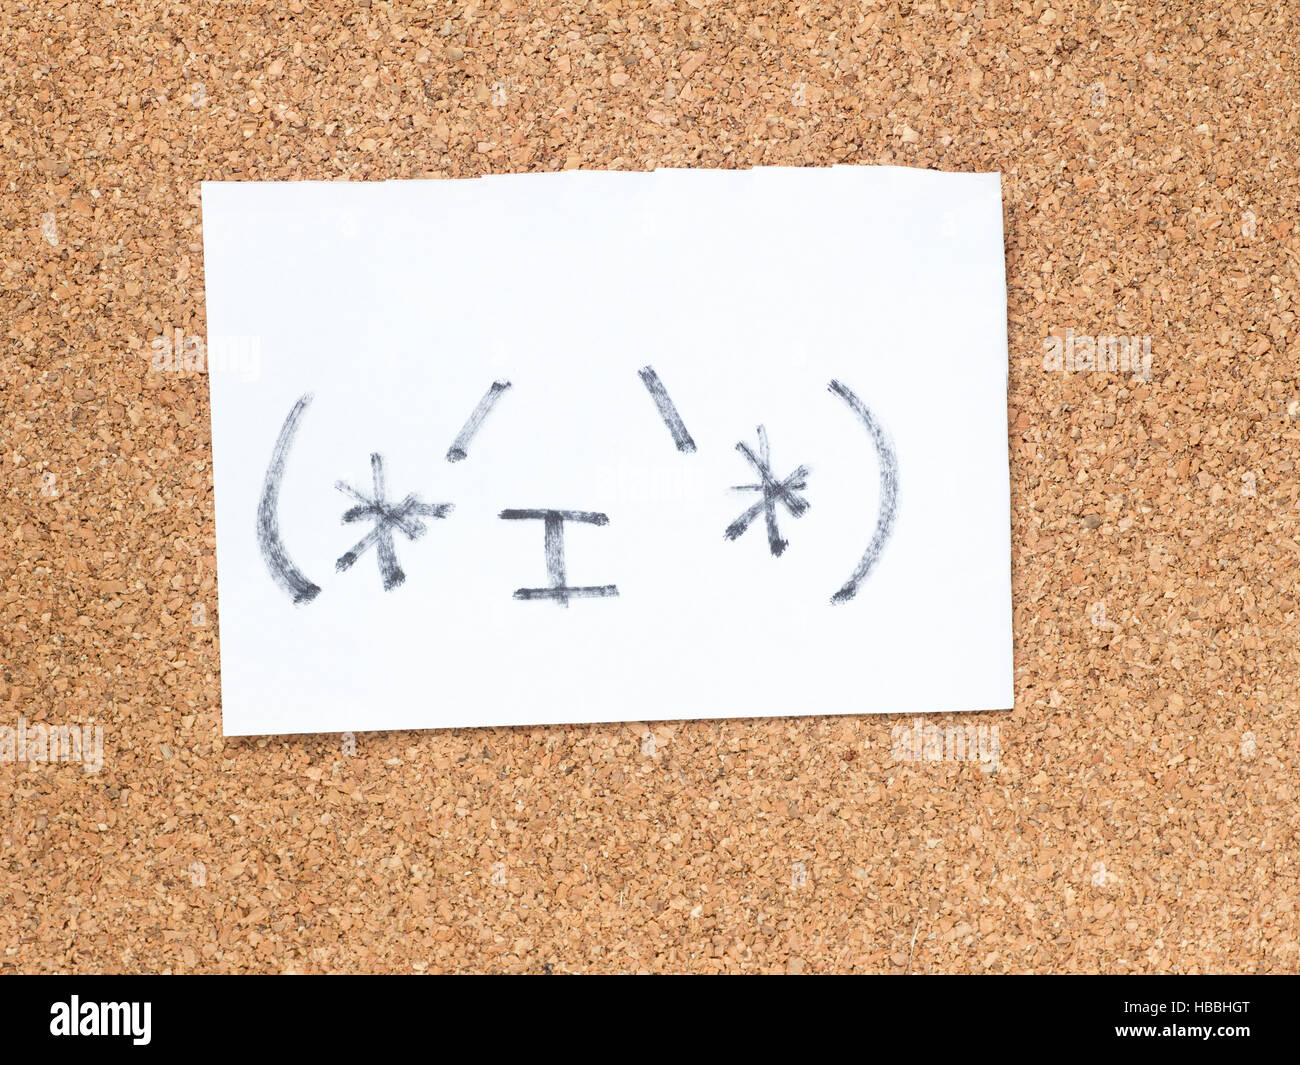 The series of Japanese emoticons called Kaomoji on the cork board, content Stock Photo